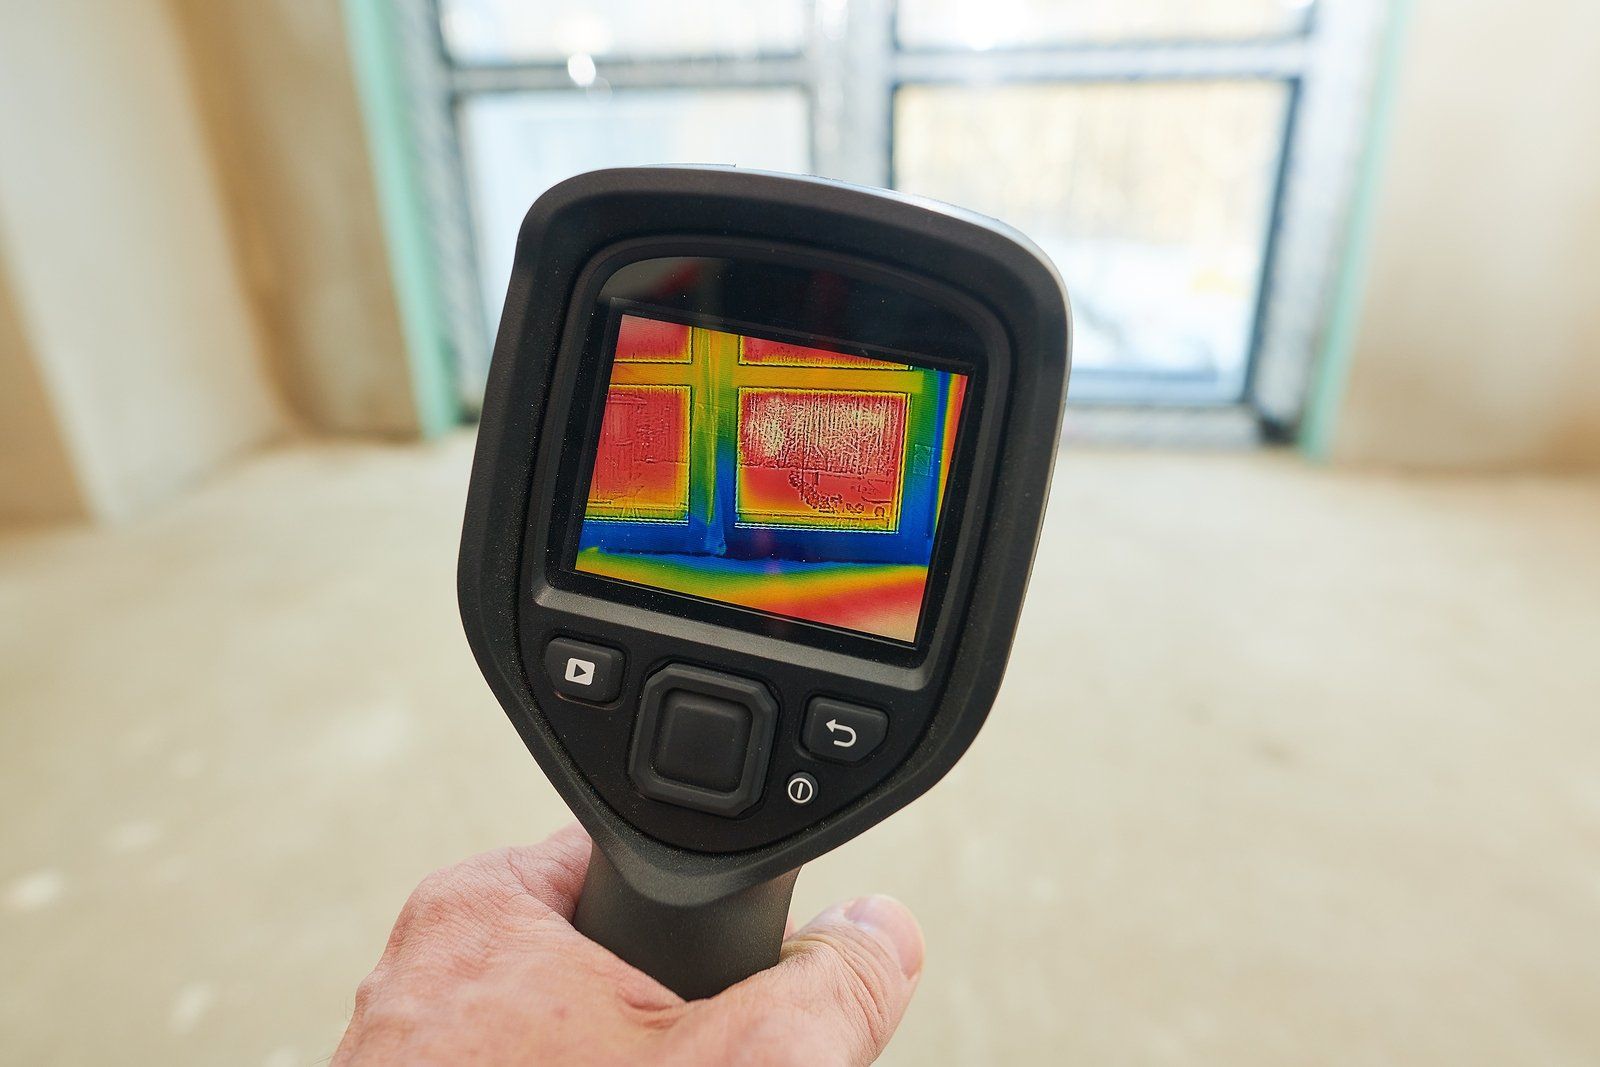 Thermal imaging is a good tool to use for complete home inspections